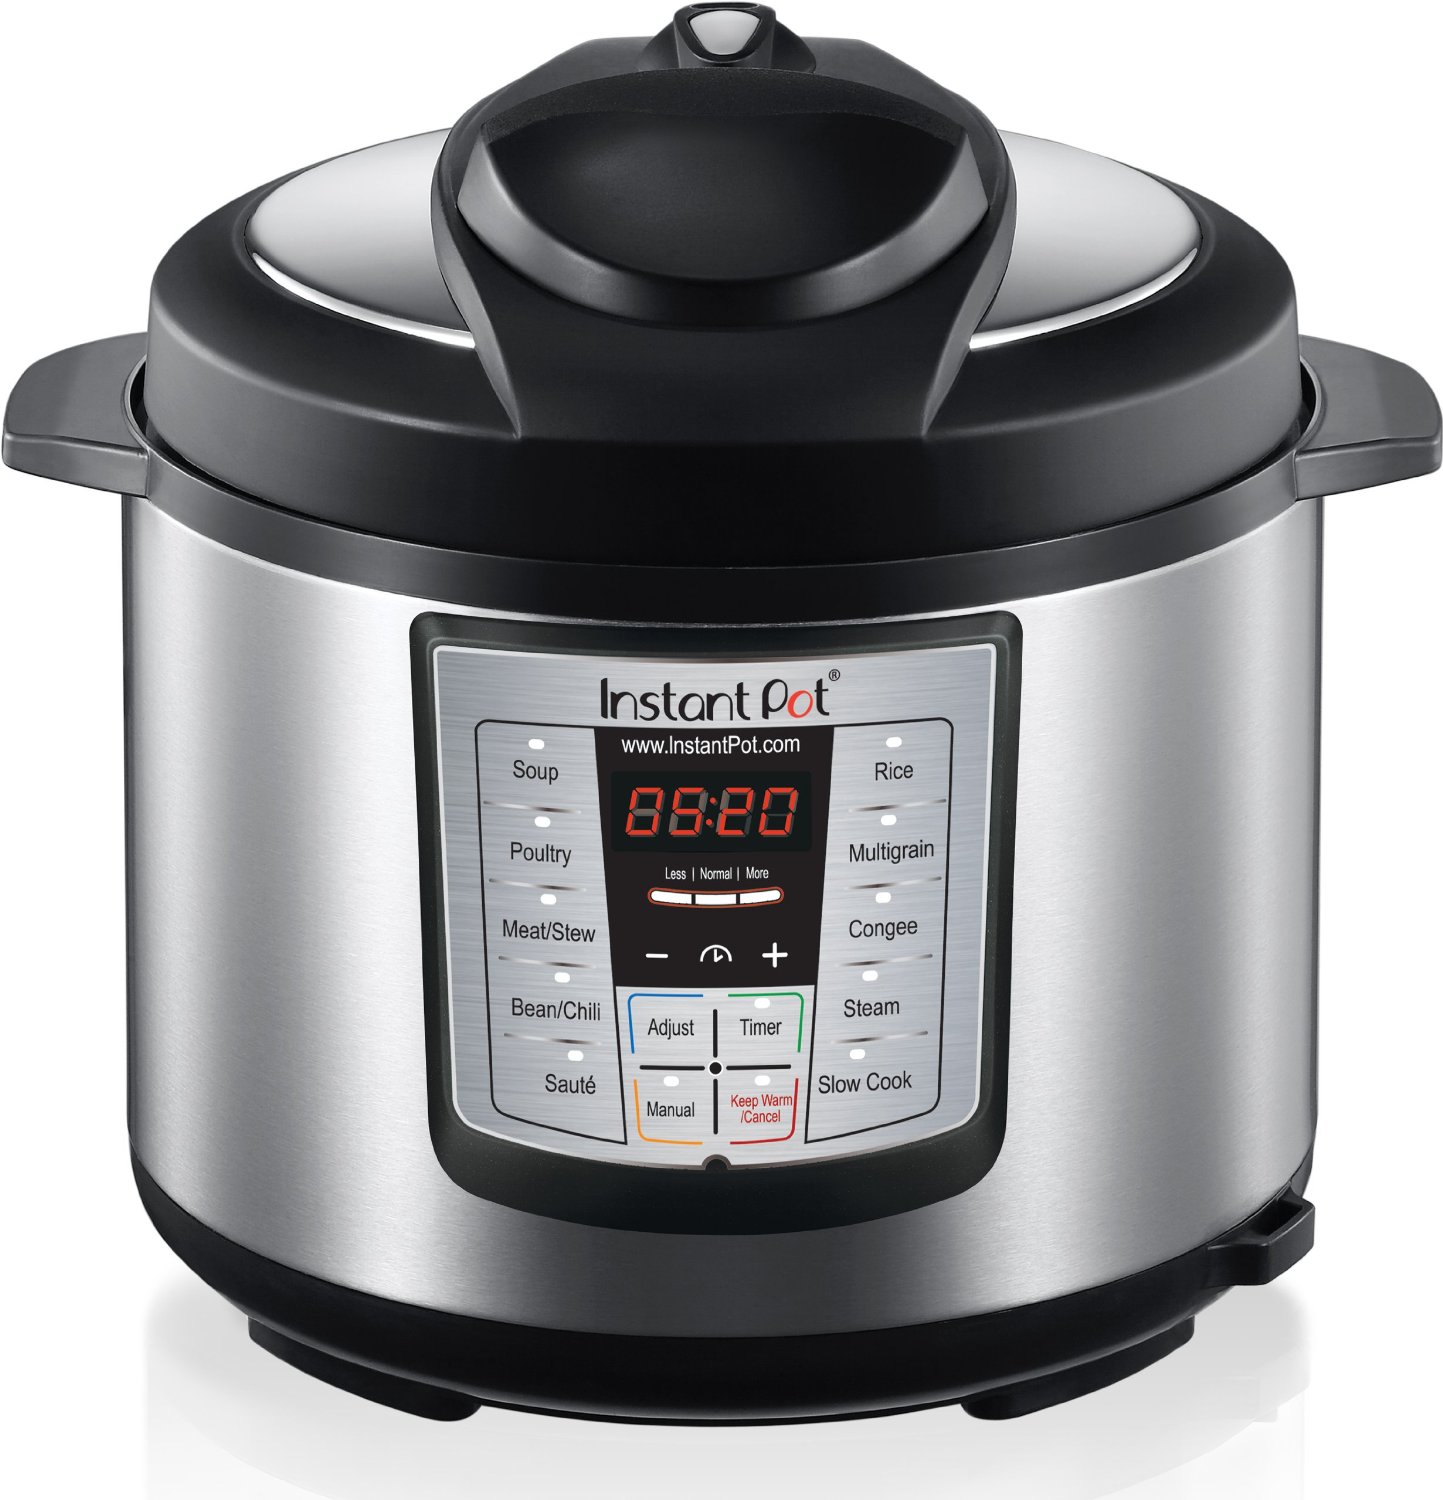 Instant pot is a pressure cooker that makes cooking so much faster!